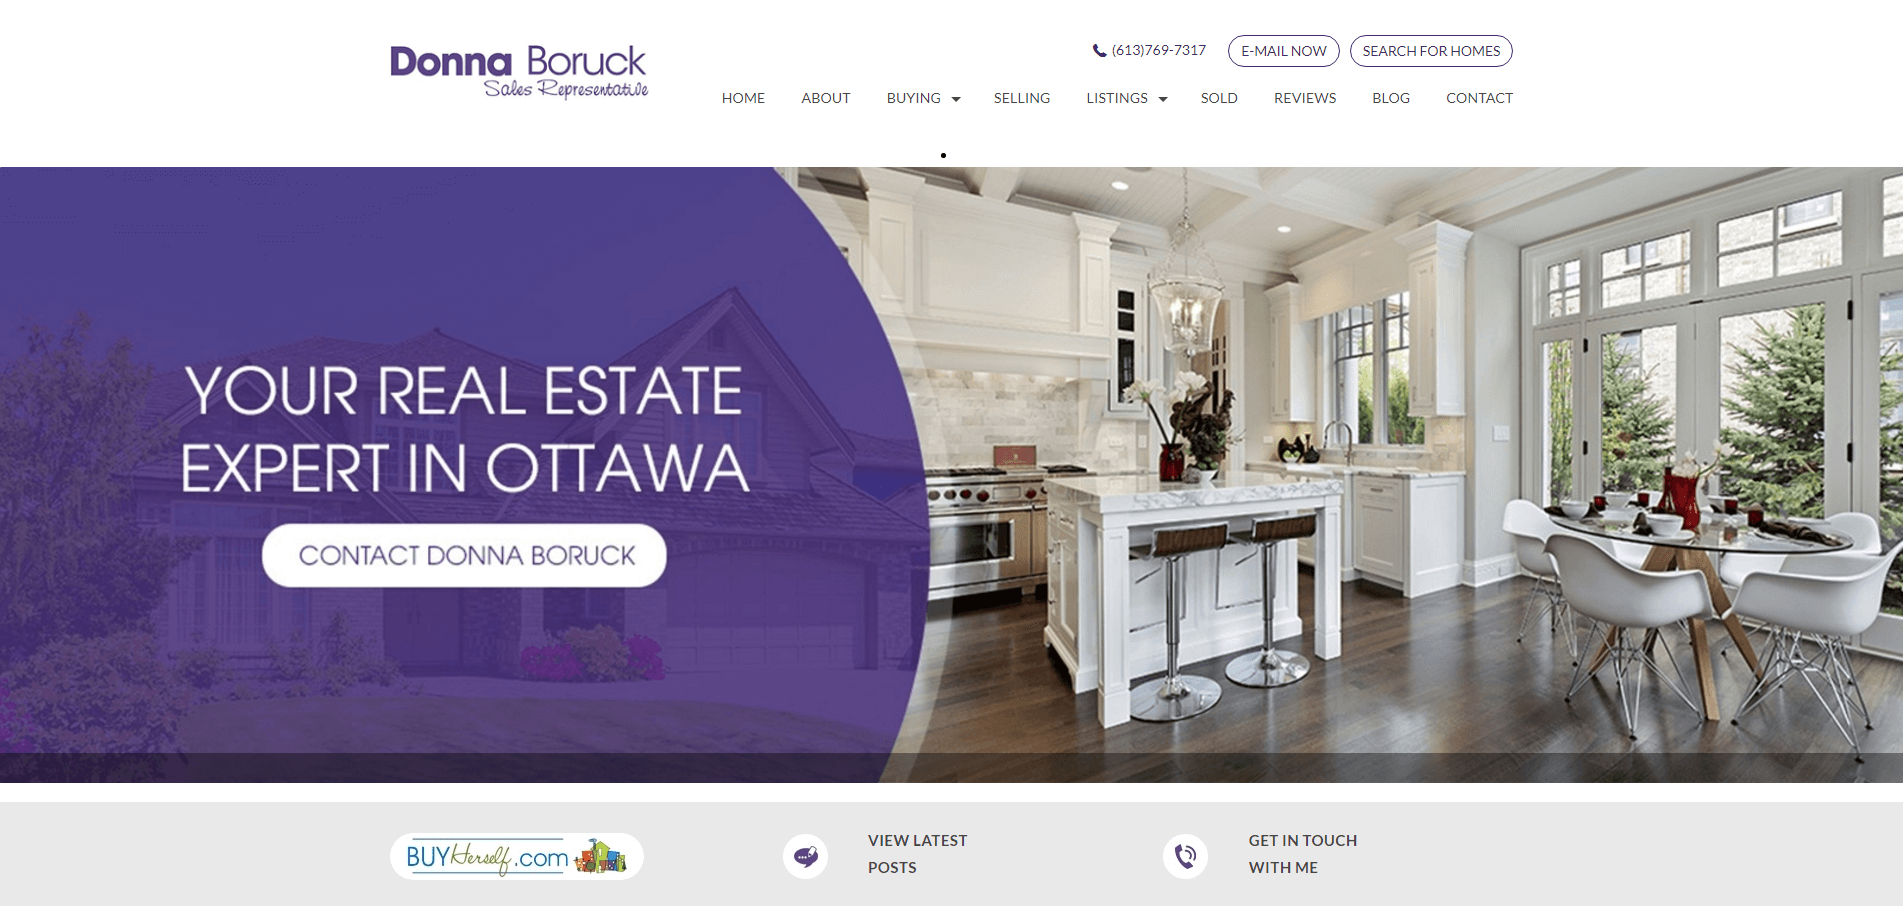  Crazy!  Looking for the best real estate websites? Here are 101 of them.  We reviewed each site and ranked them 1-101.  Here's donnaboruck.com.  Want to see who made the cut? 